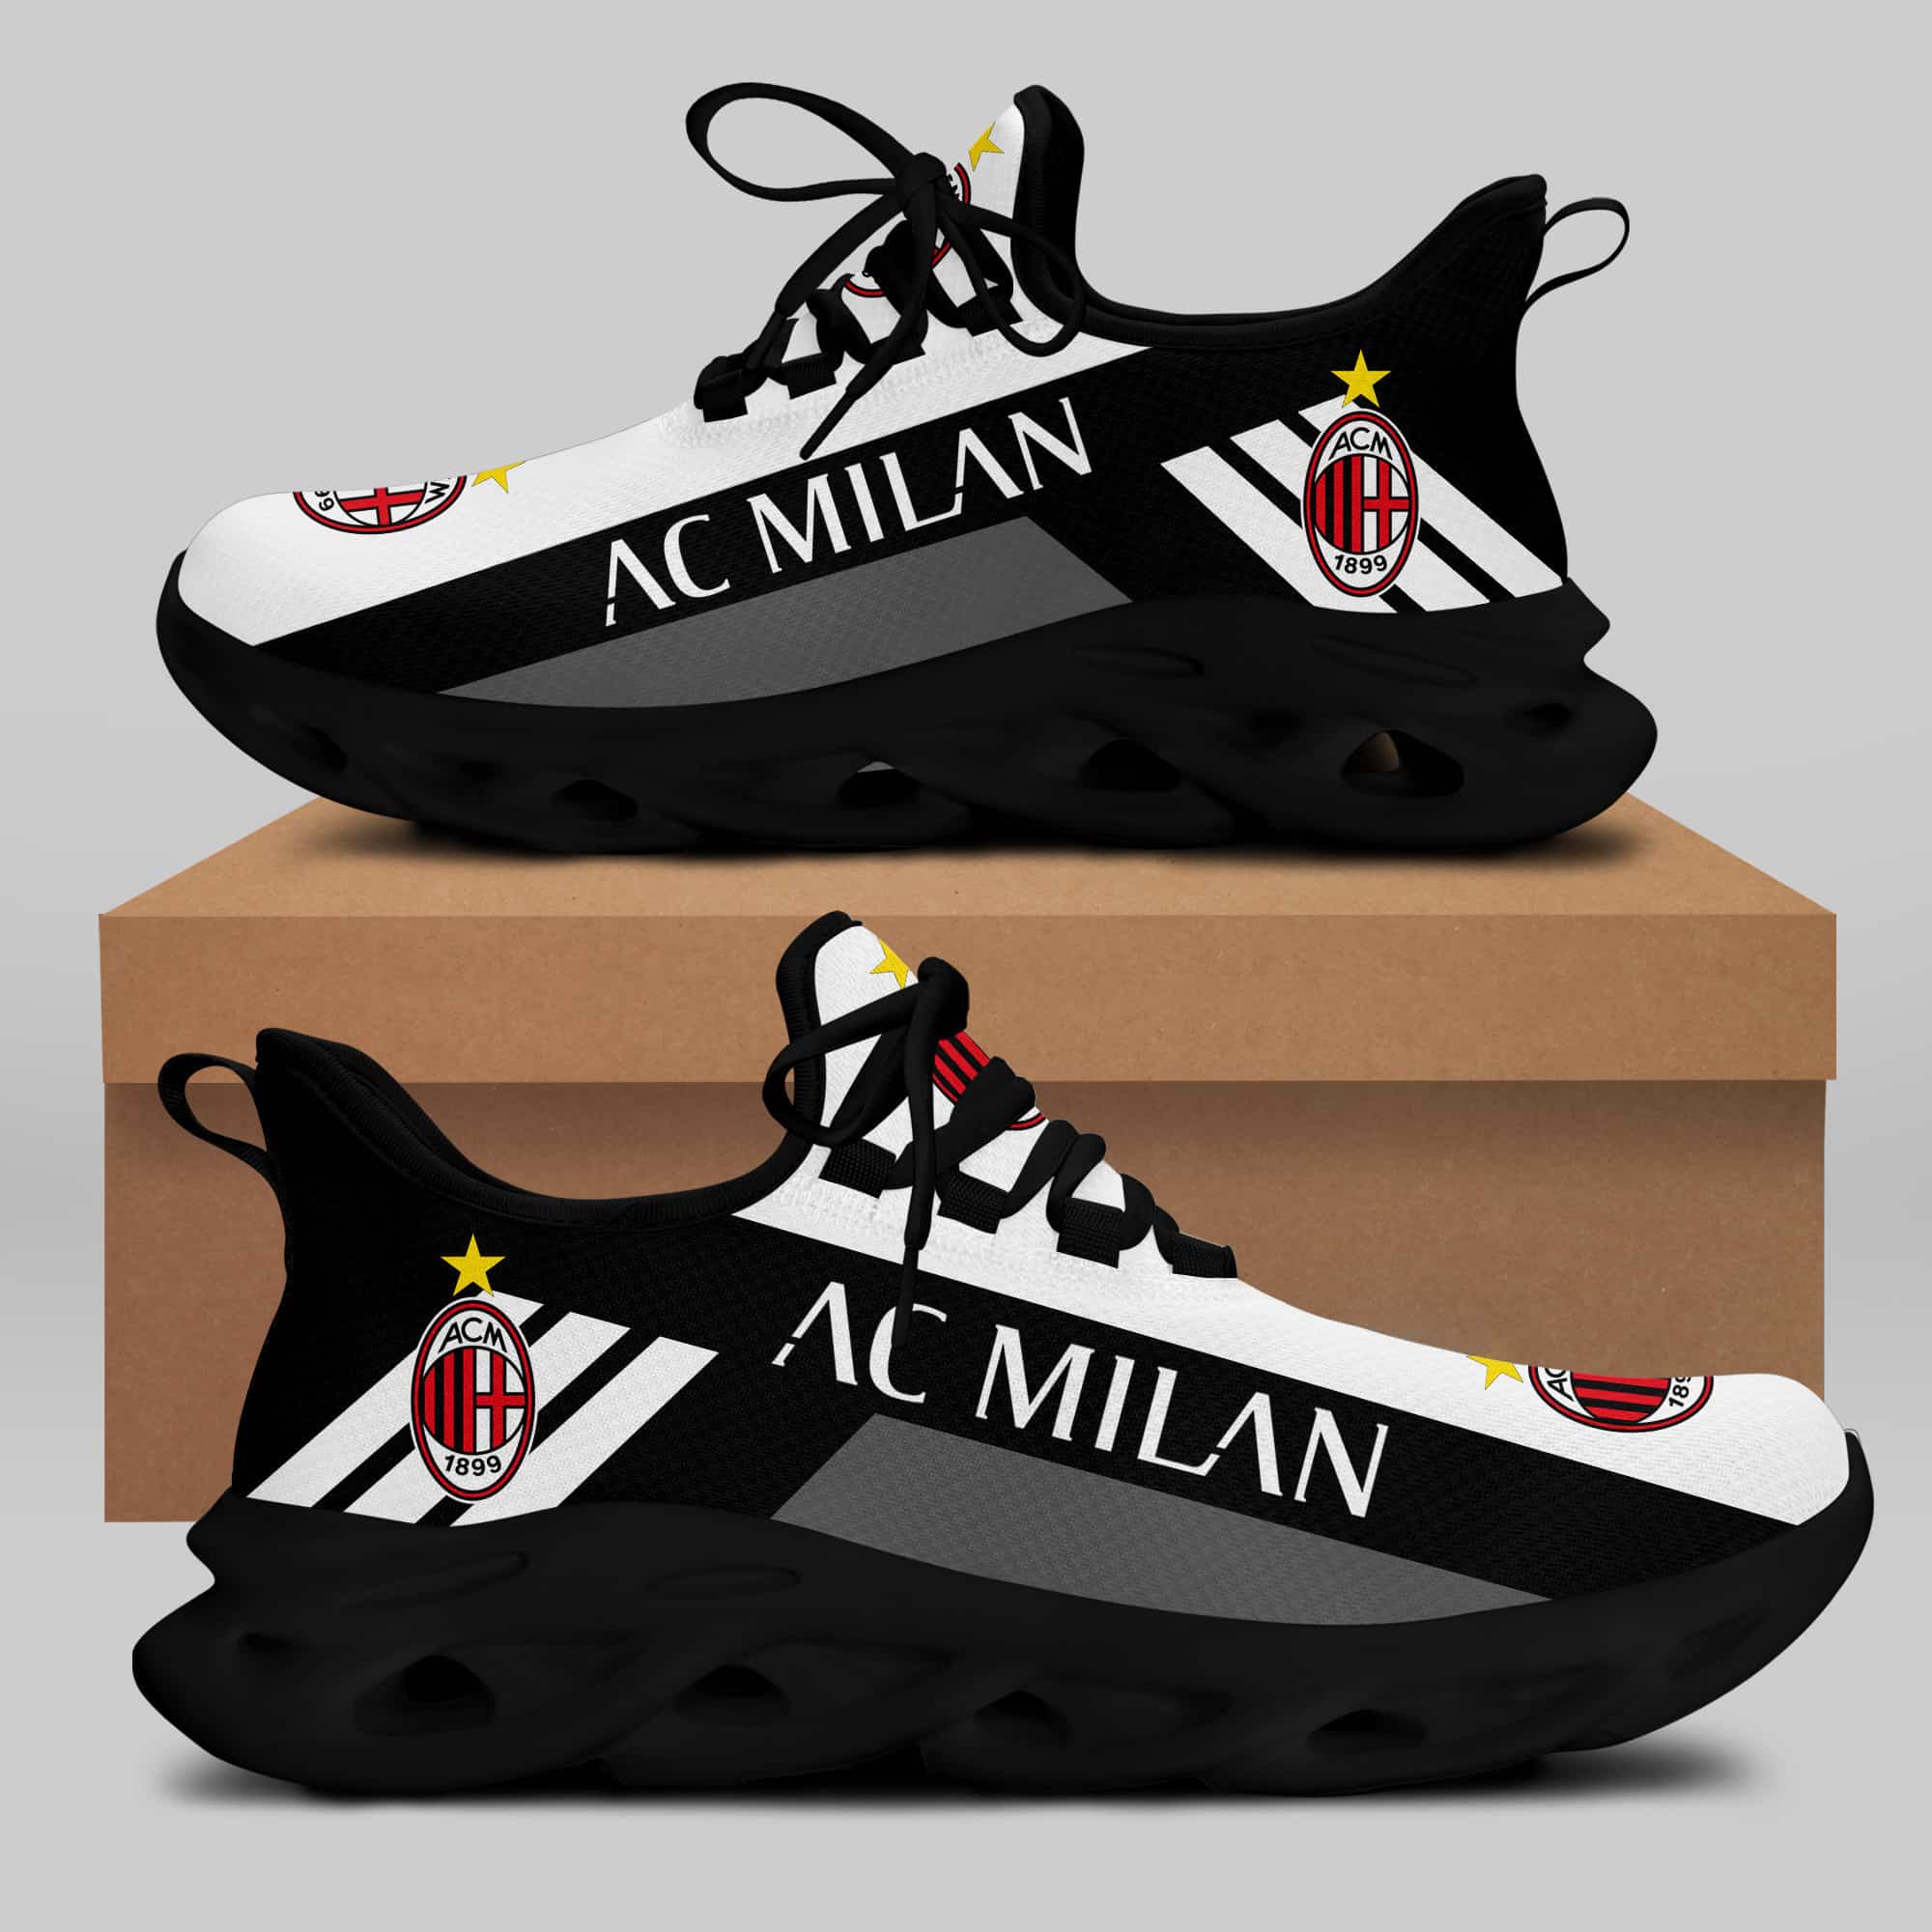 Ac Milan Running Shoes Max Soul Shoes Sneakers Ver 19 2